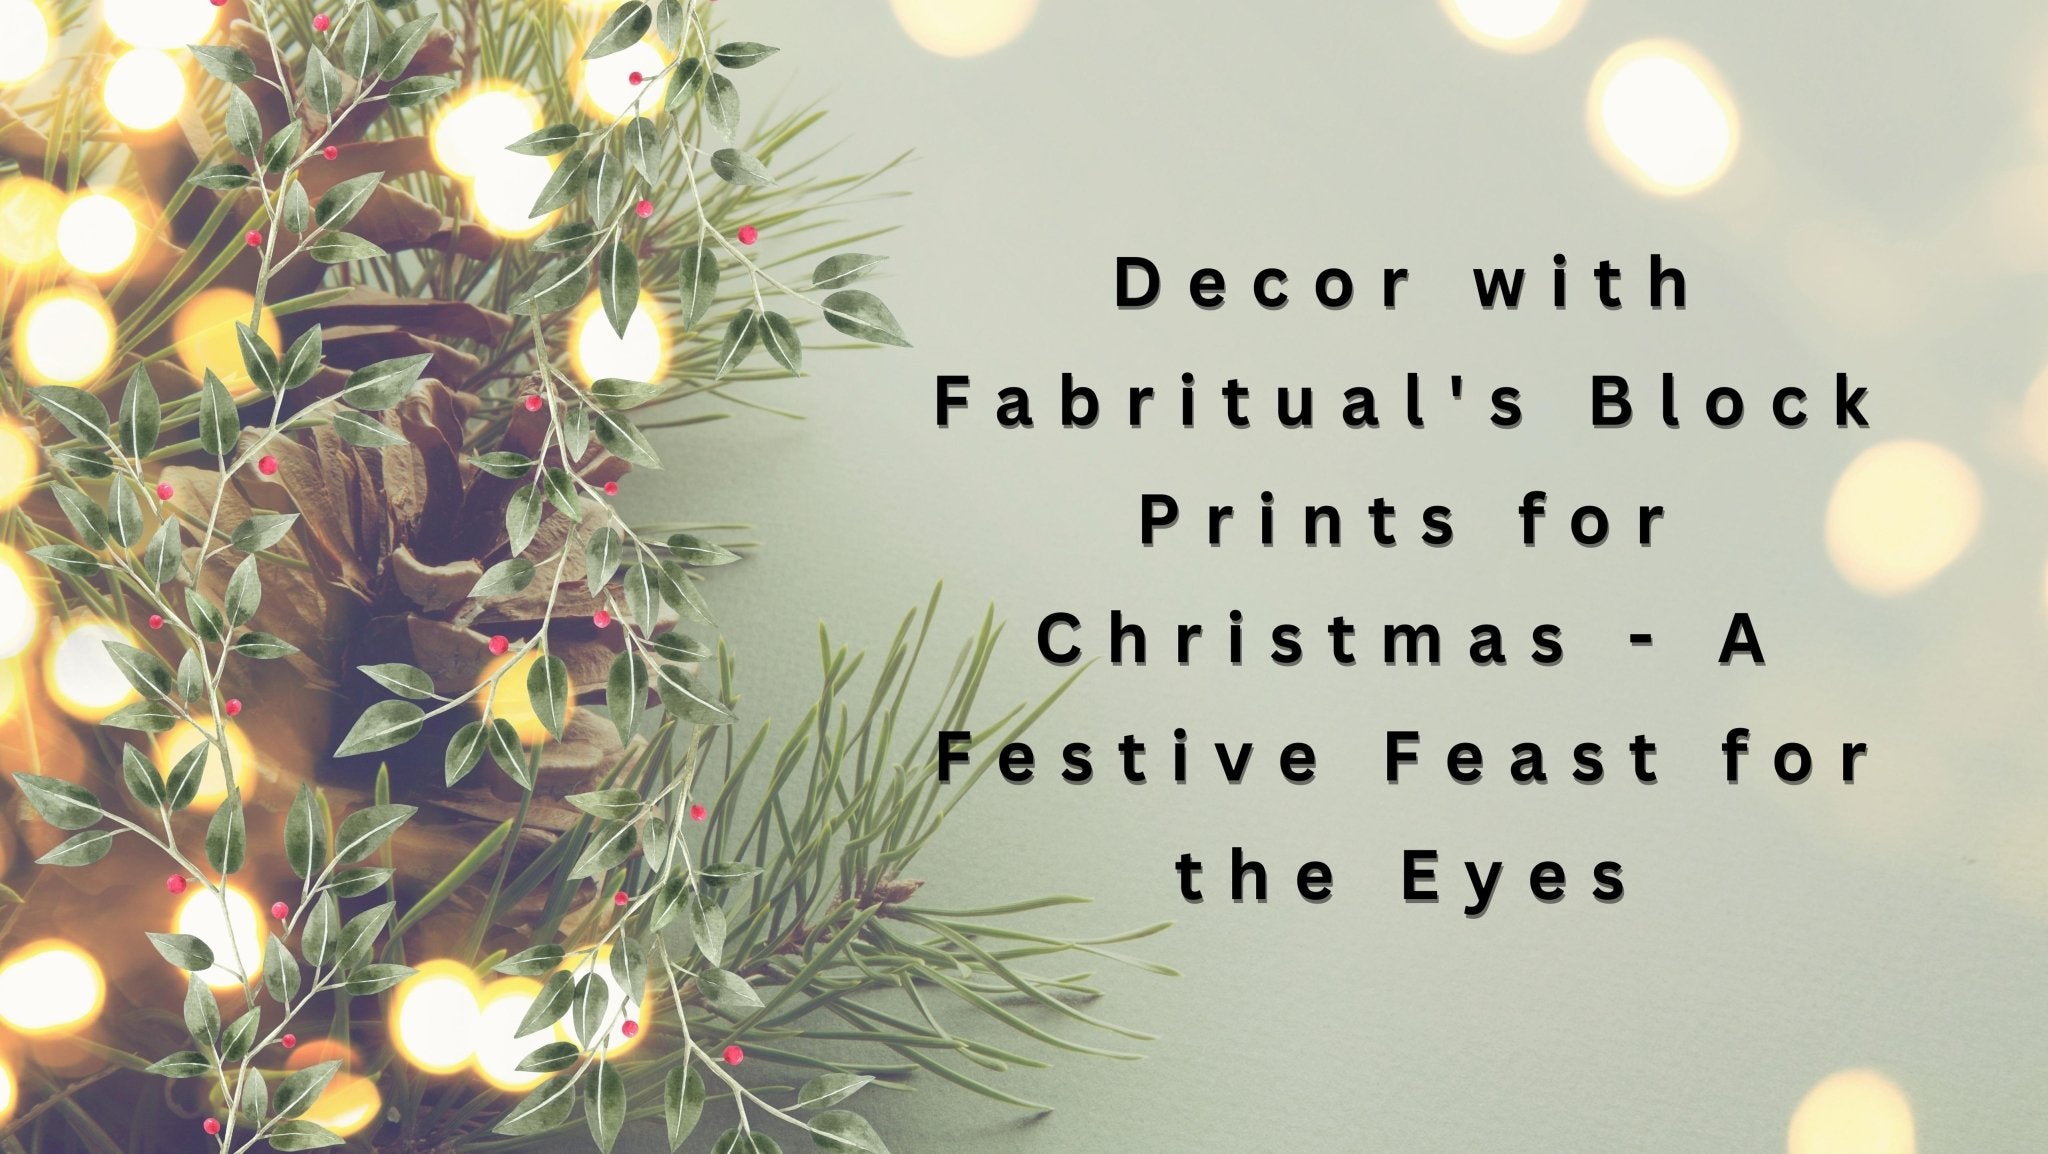 Decor with Fabritual's Block Prints for Christmas - A Festive Feast for the Eyes - Fabritual